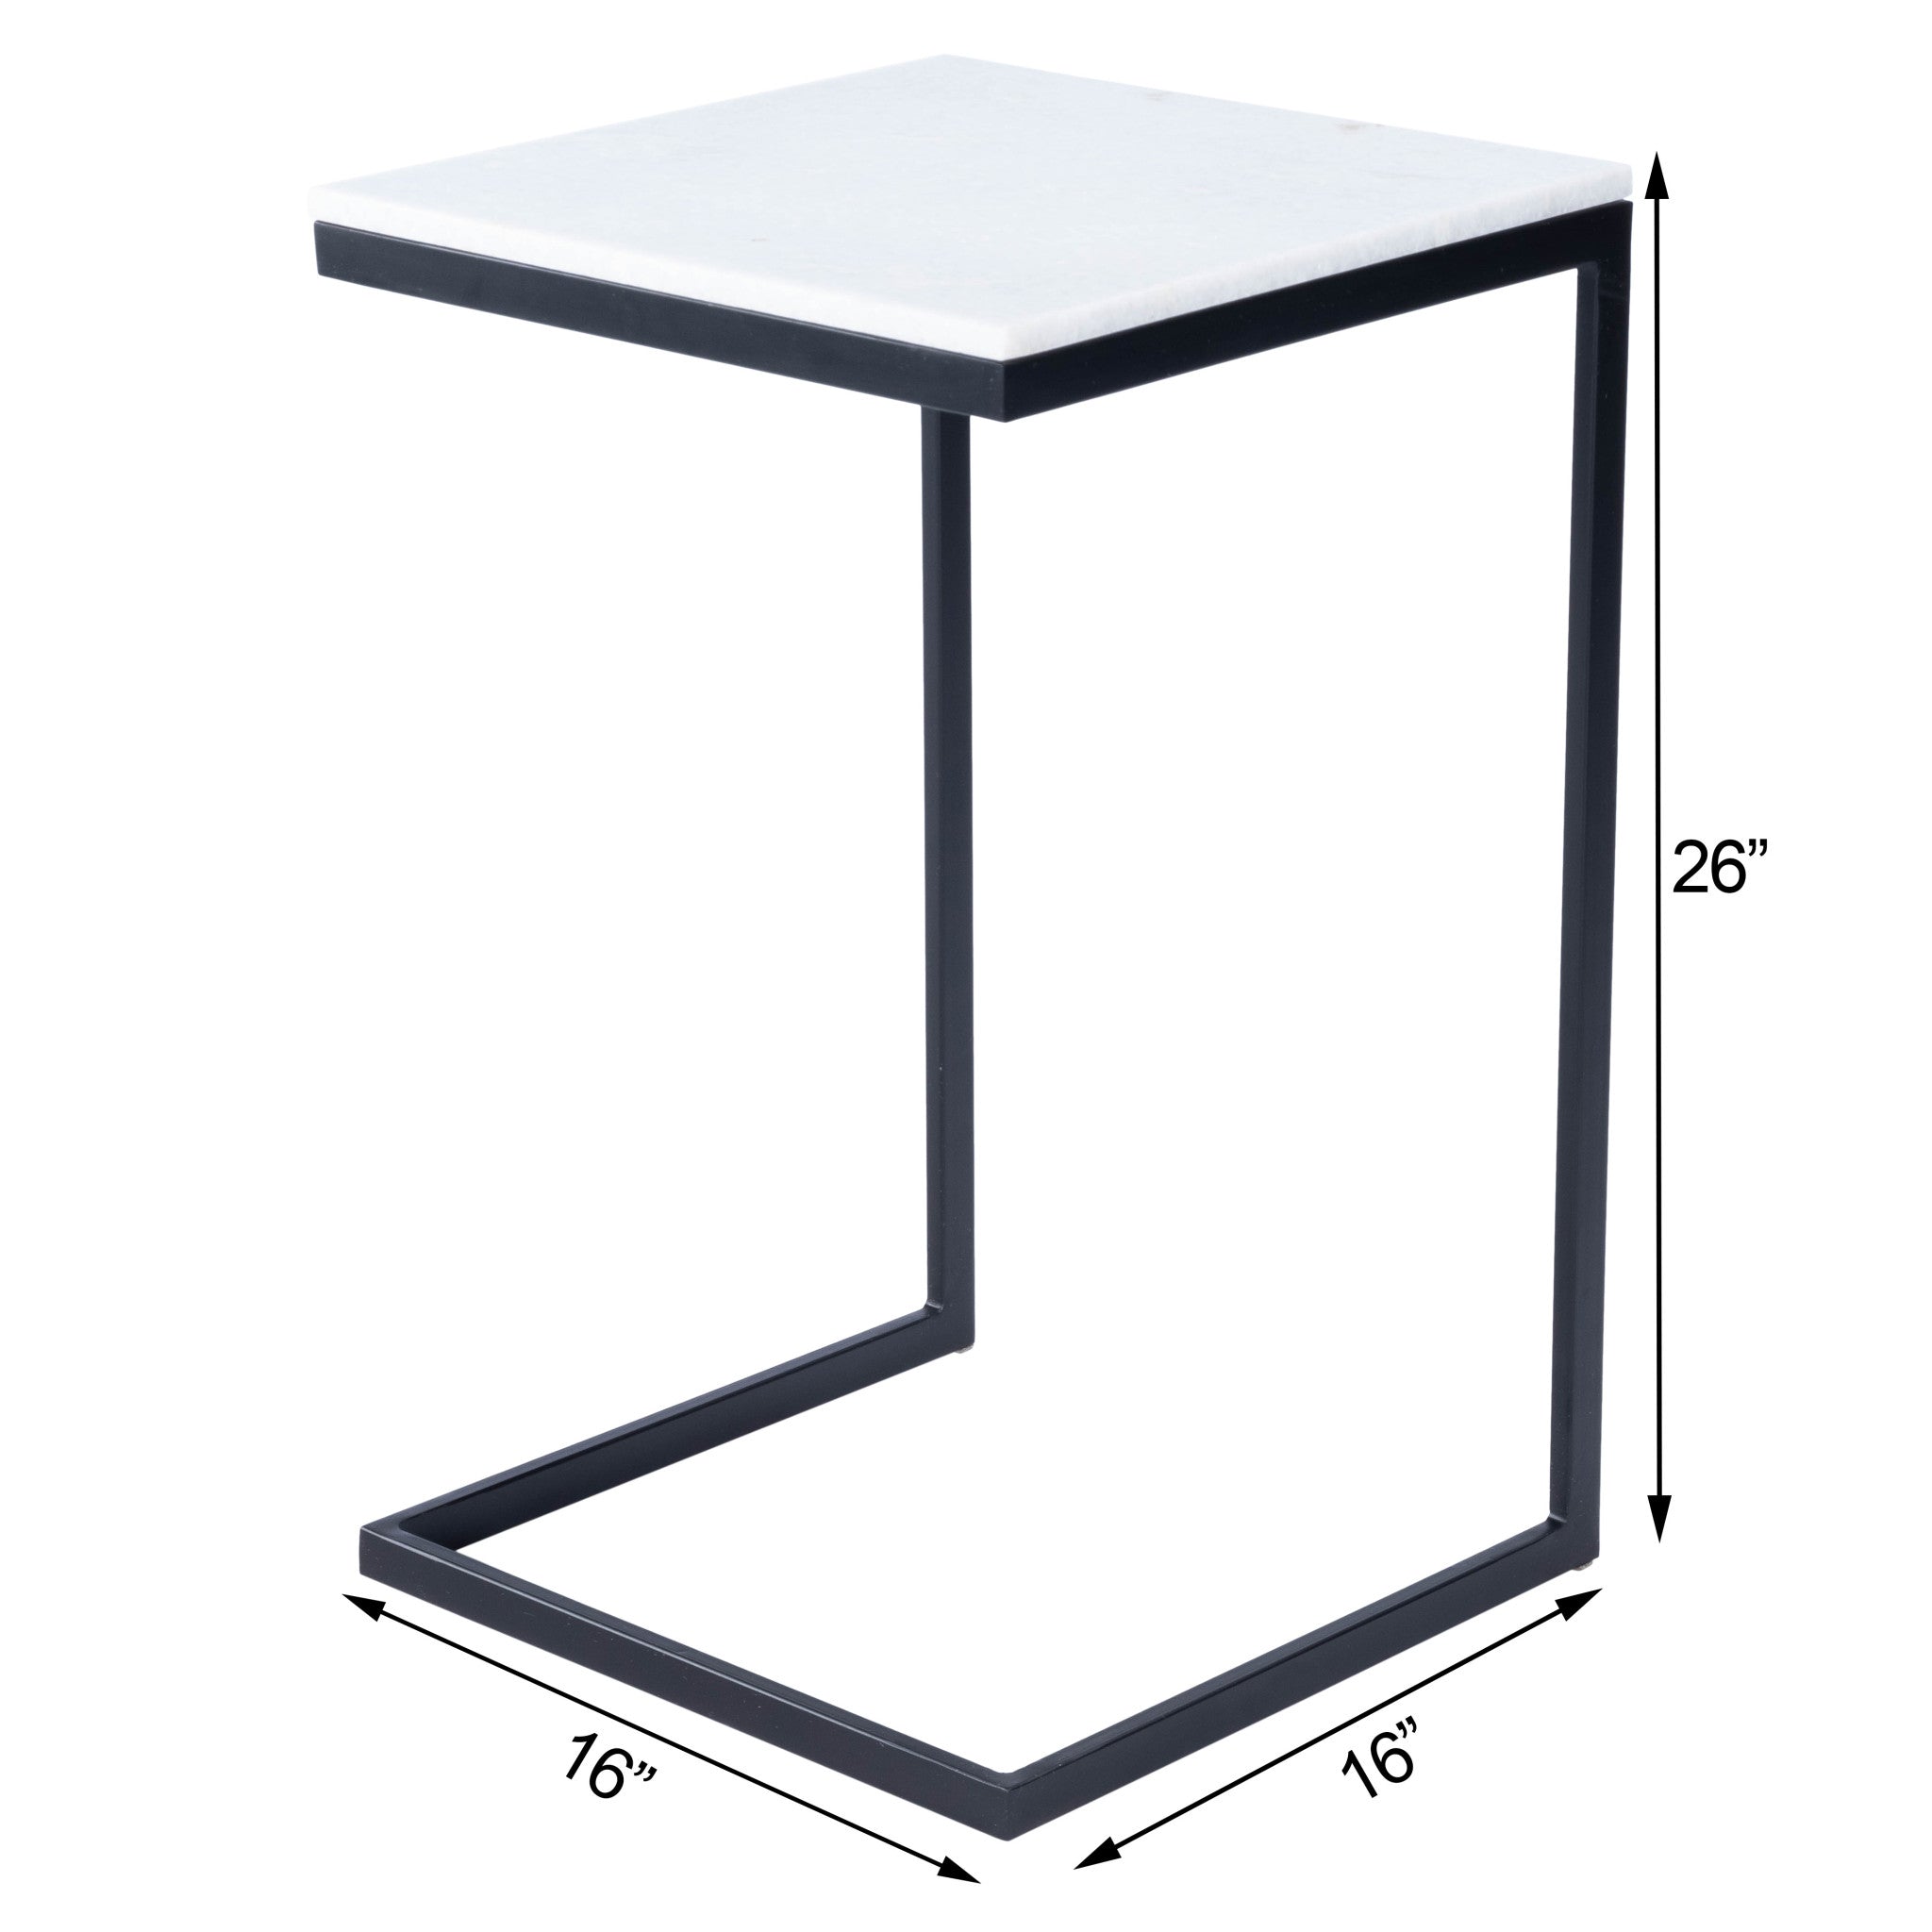 26" Black and White Marble Square C Shape End Table